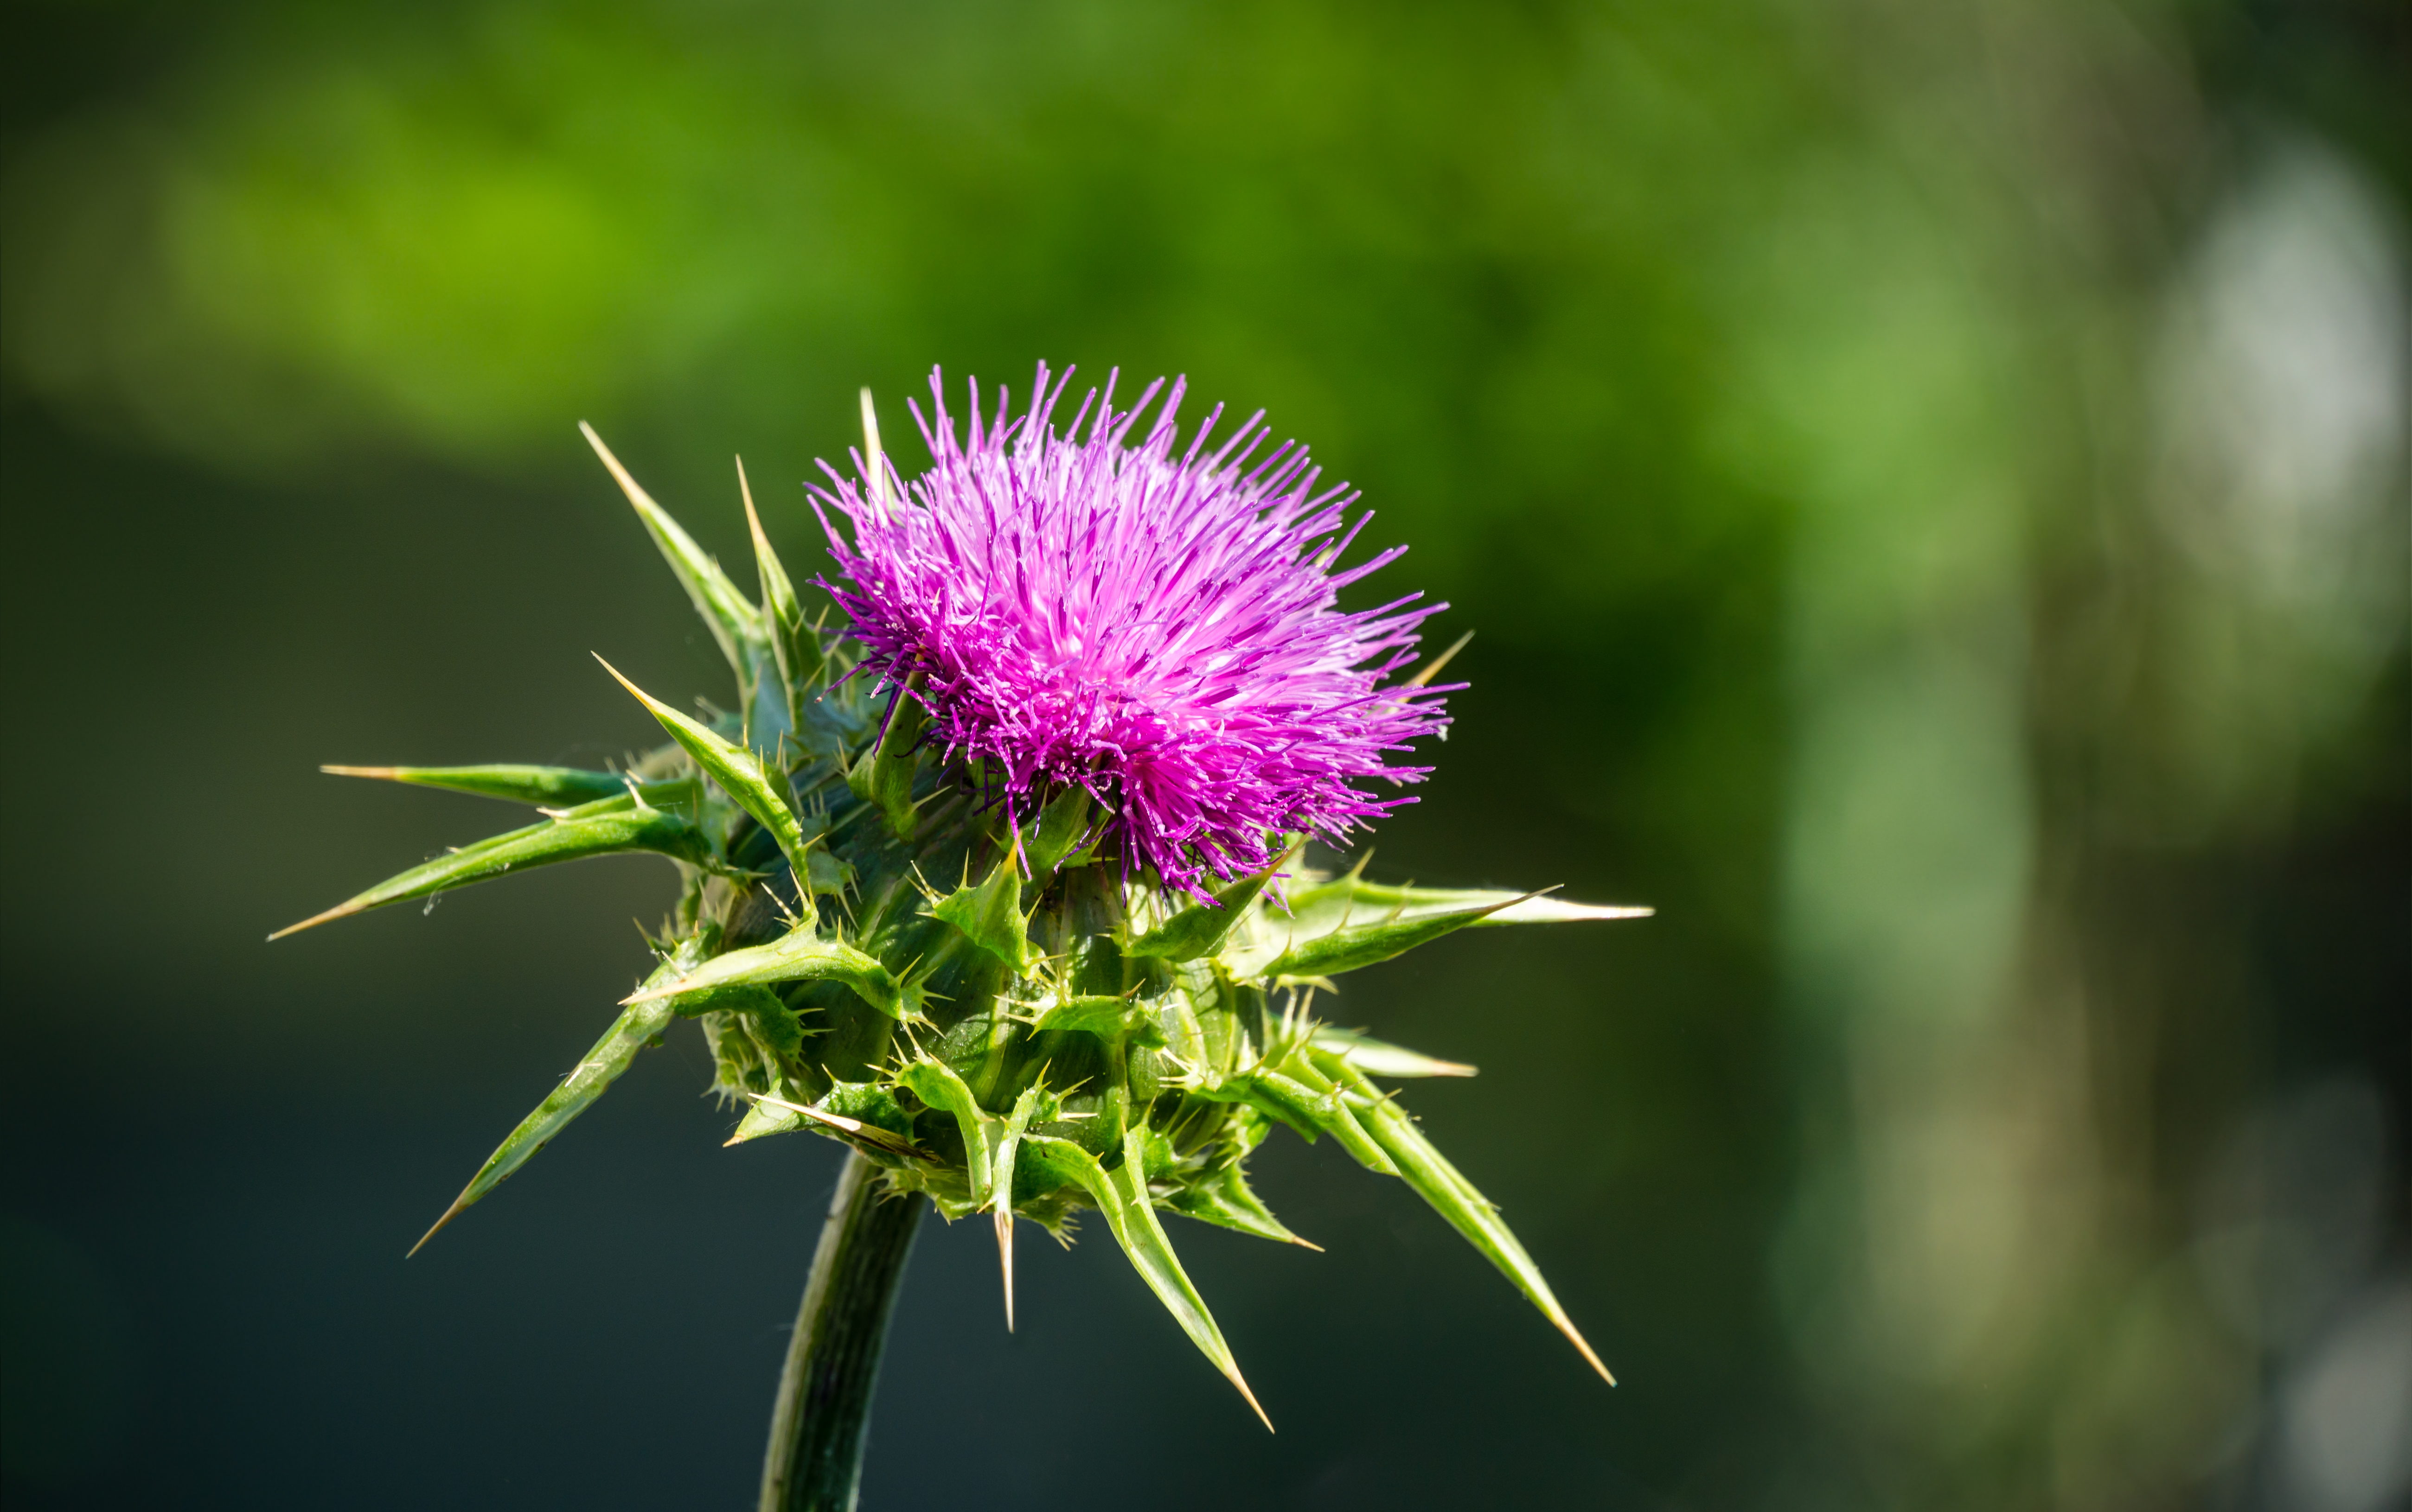 Milk Thistle can help protect your liver and improve chemo